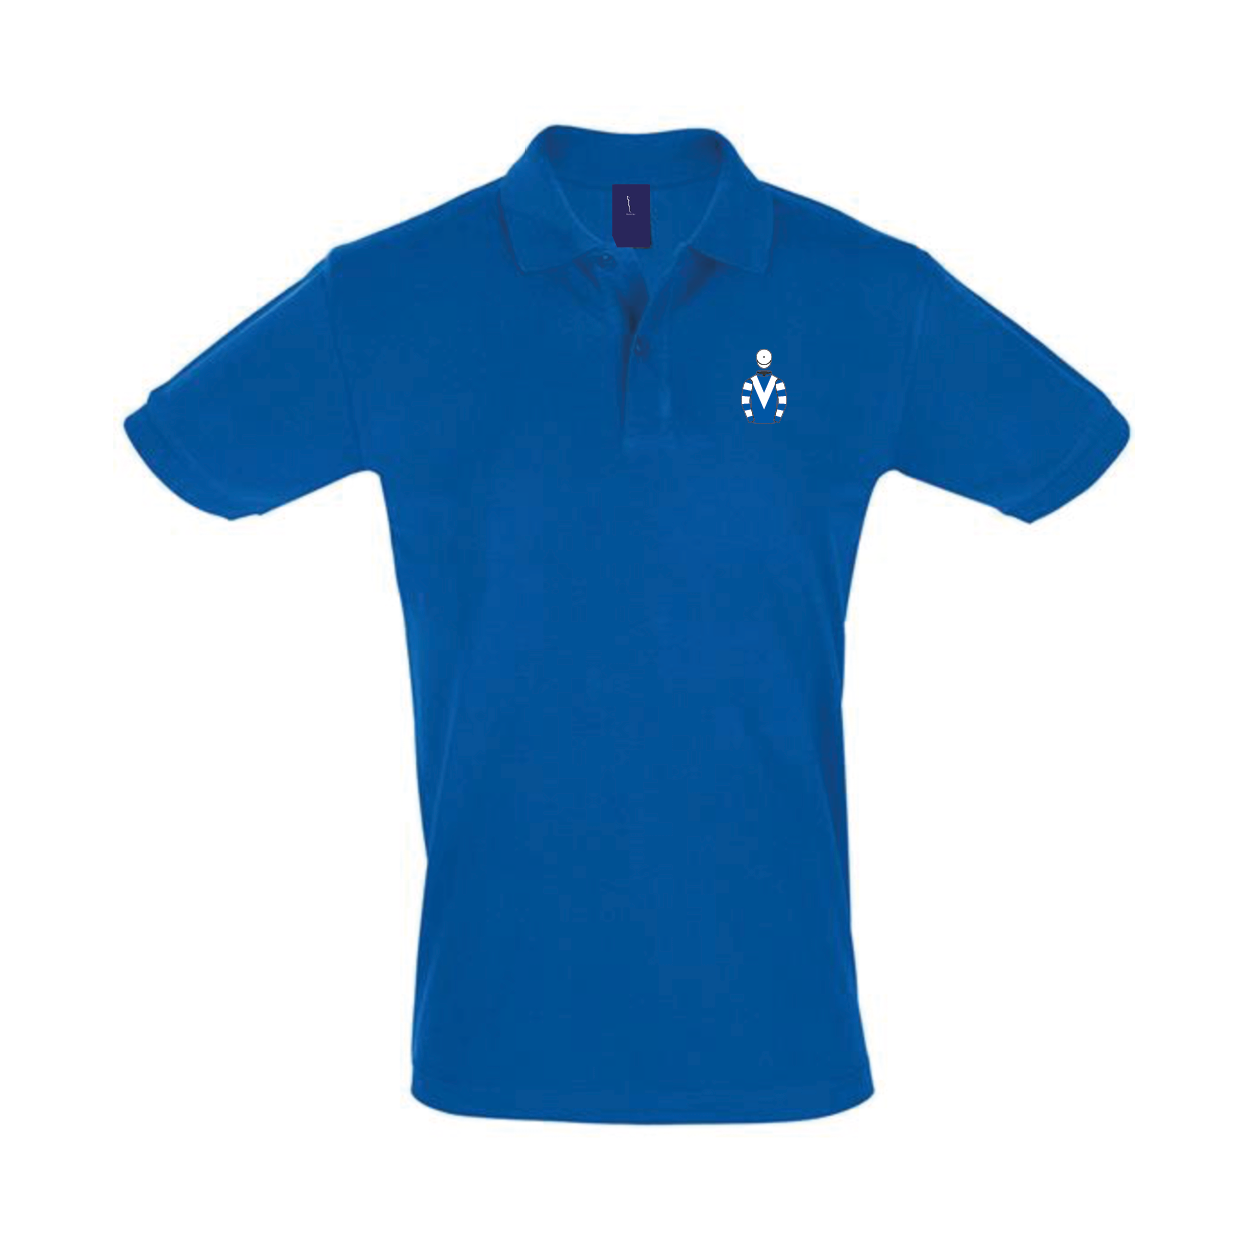 Mens Mrs P J Vogt Embroidered Polo Shirt - Clothing - Hacked Up